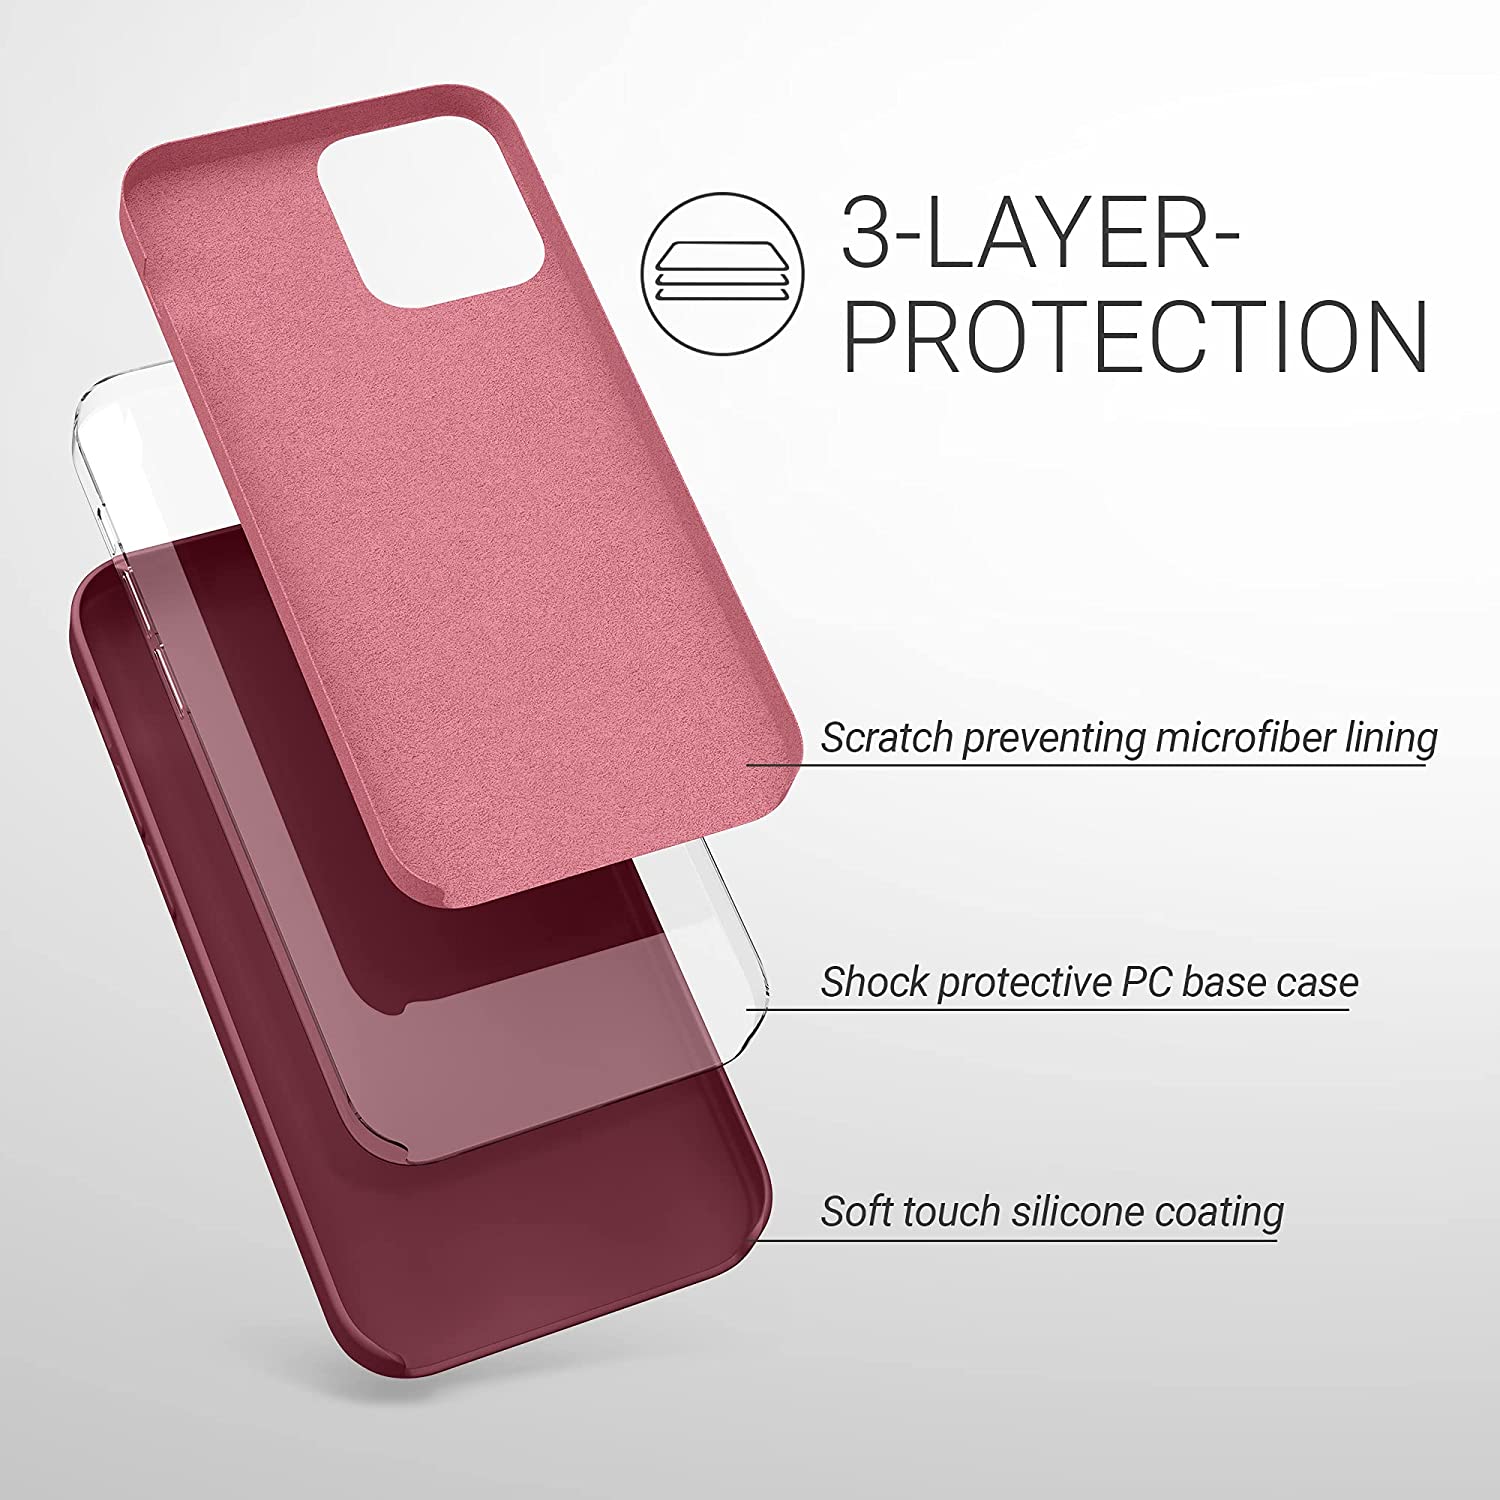 kwmobile TPU Silicone Case Compatible with Apple iPhone 12 Pro Max - Case Slim Protective Phone Cover with Soft Finish - Rhubarb Red - e4cents